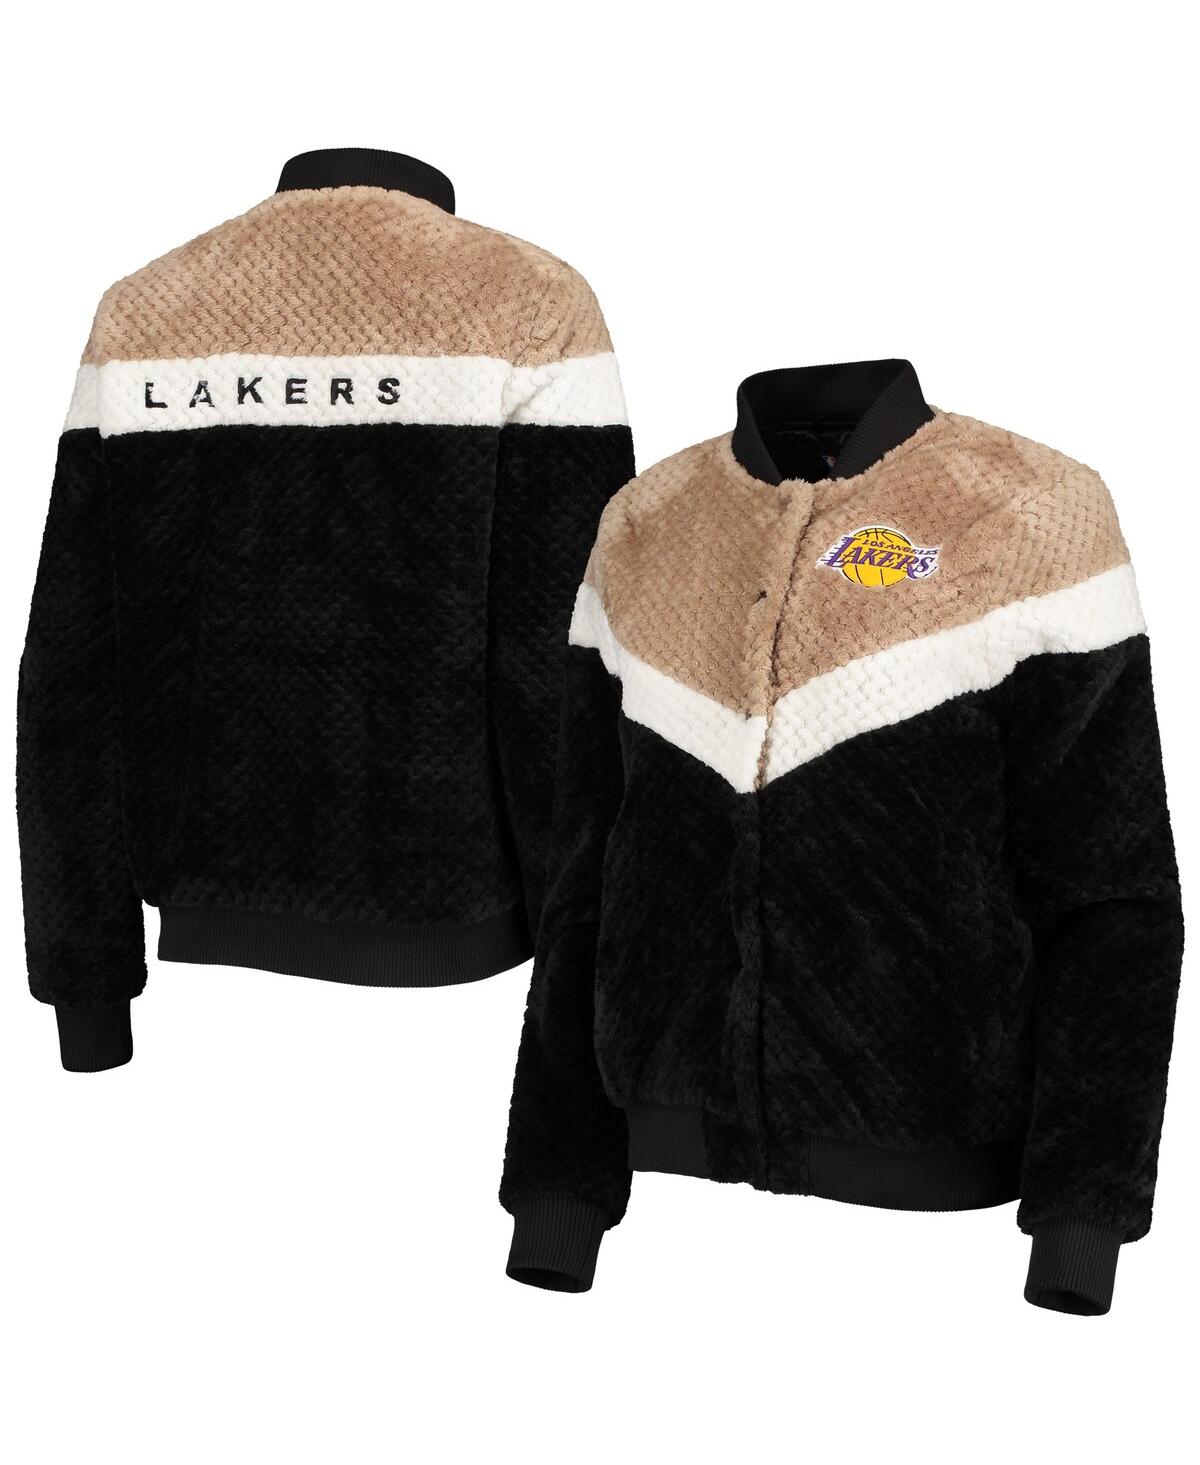 G-III 4HER BY CARL BANKS WOMEN'S BLACK, TAN LOS ANGELES LAKERS RIOT SQUAD SHERPA FULL-SNAP JACKET